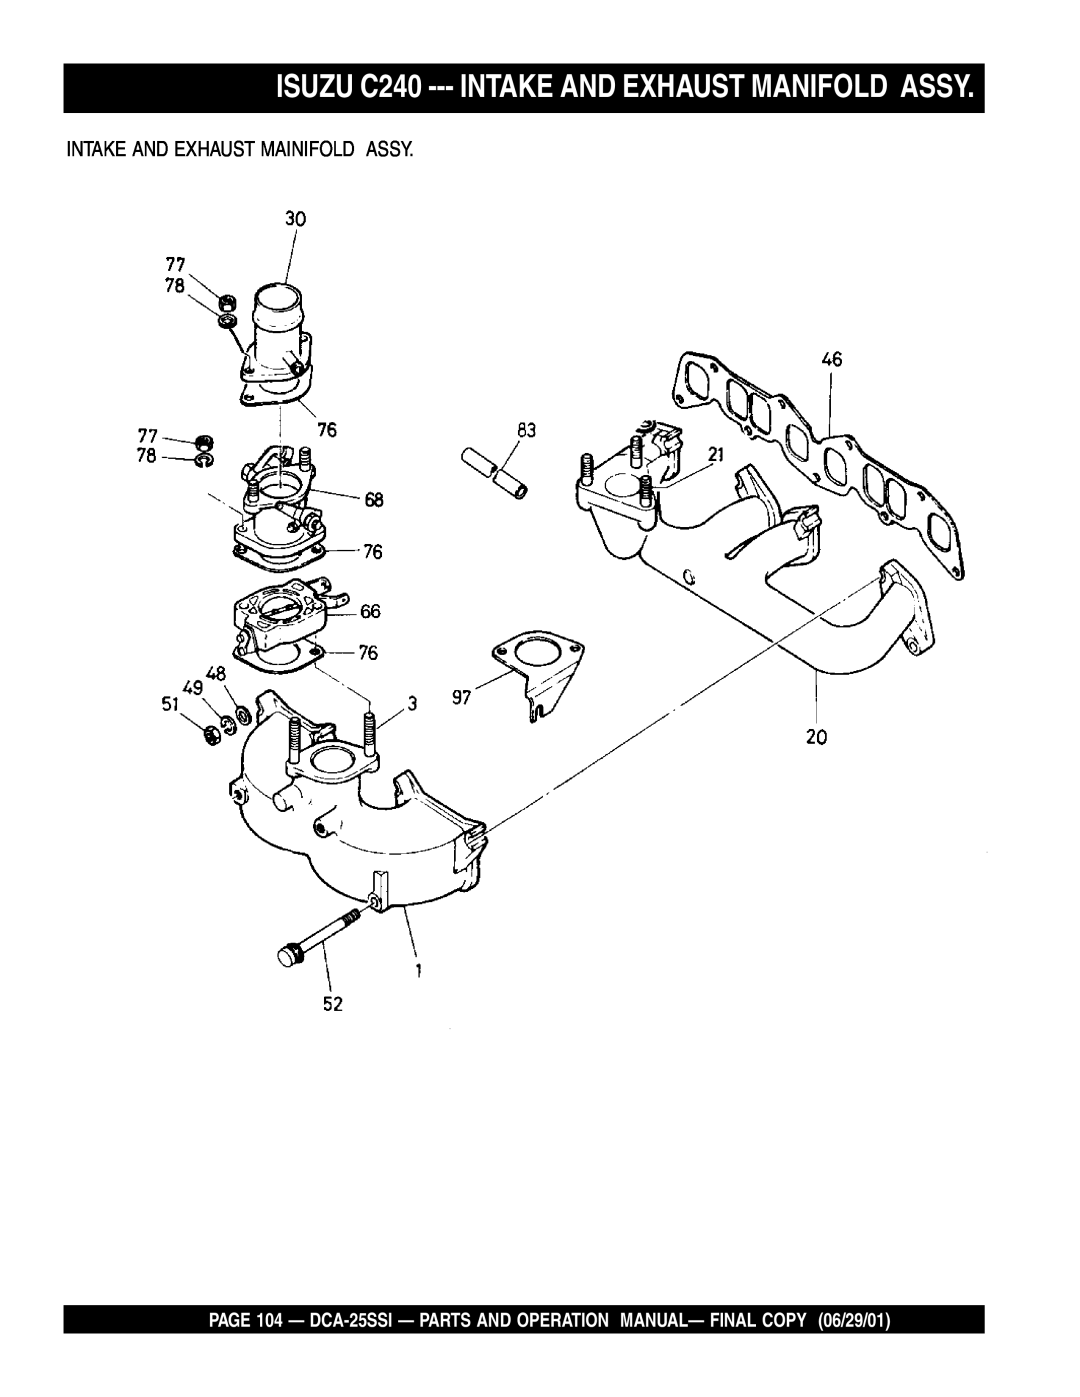 Multiquip DCA-25SSI operation manual ISUZU C240 ---INTAKE AND EXHAUST MANIFOLD ASSY, Intake And Exhaust Mainifold Assy 